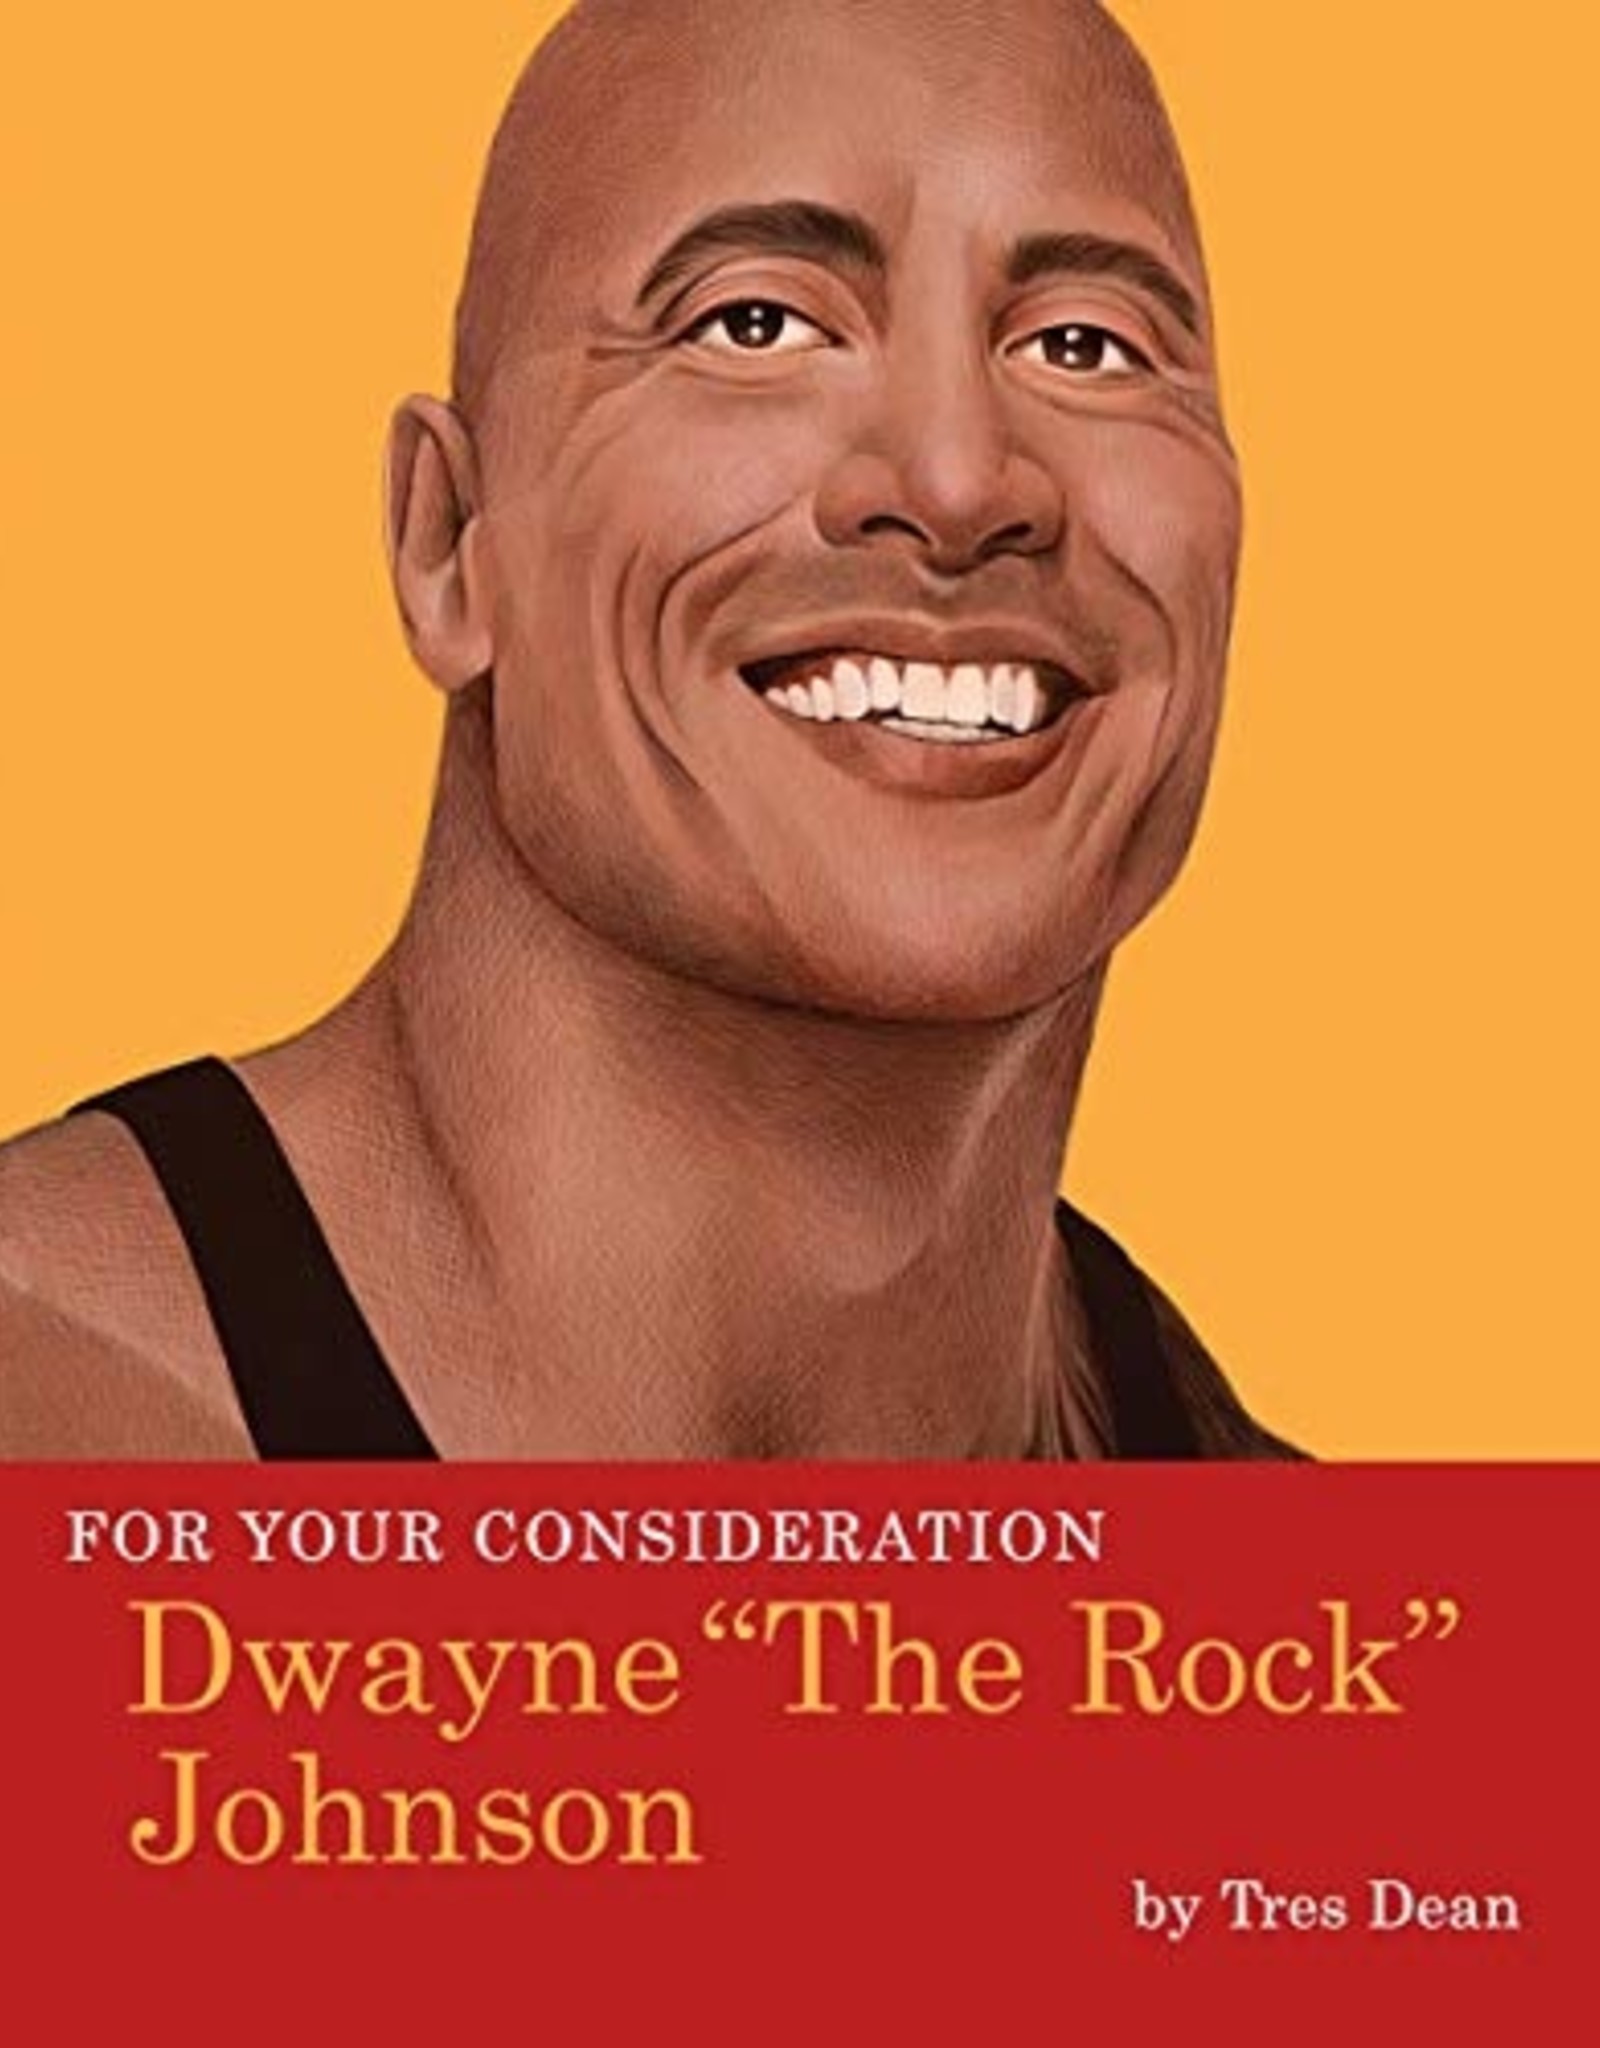 Quirk Books For Your Consideration Dwayne "The Rock" Johnson TP (Diamond Summit)